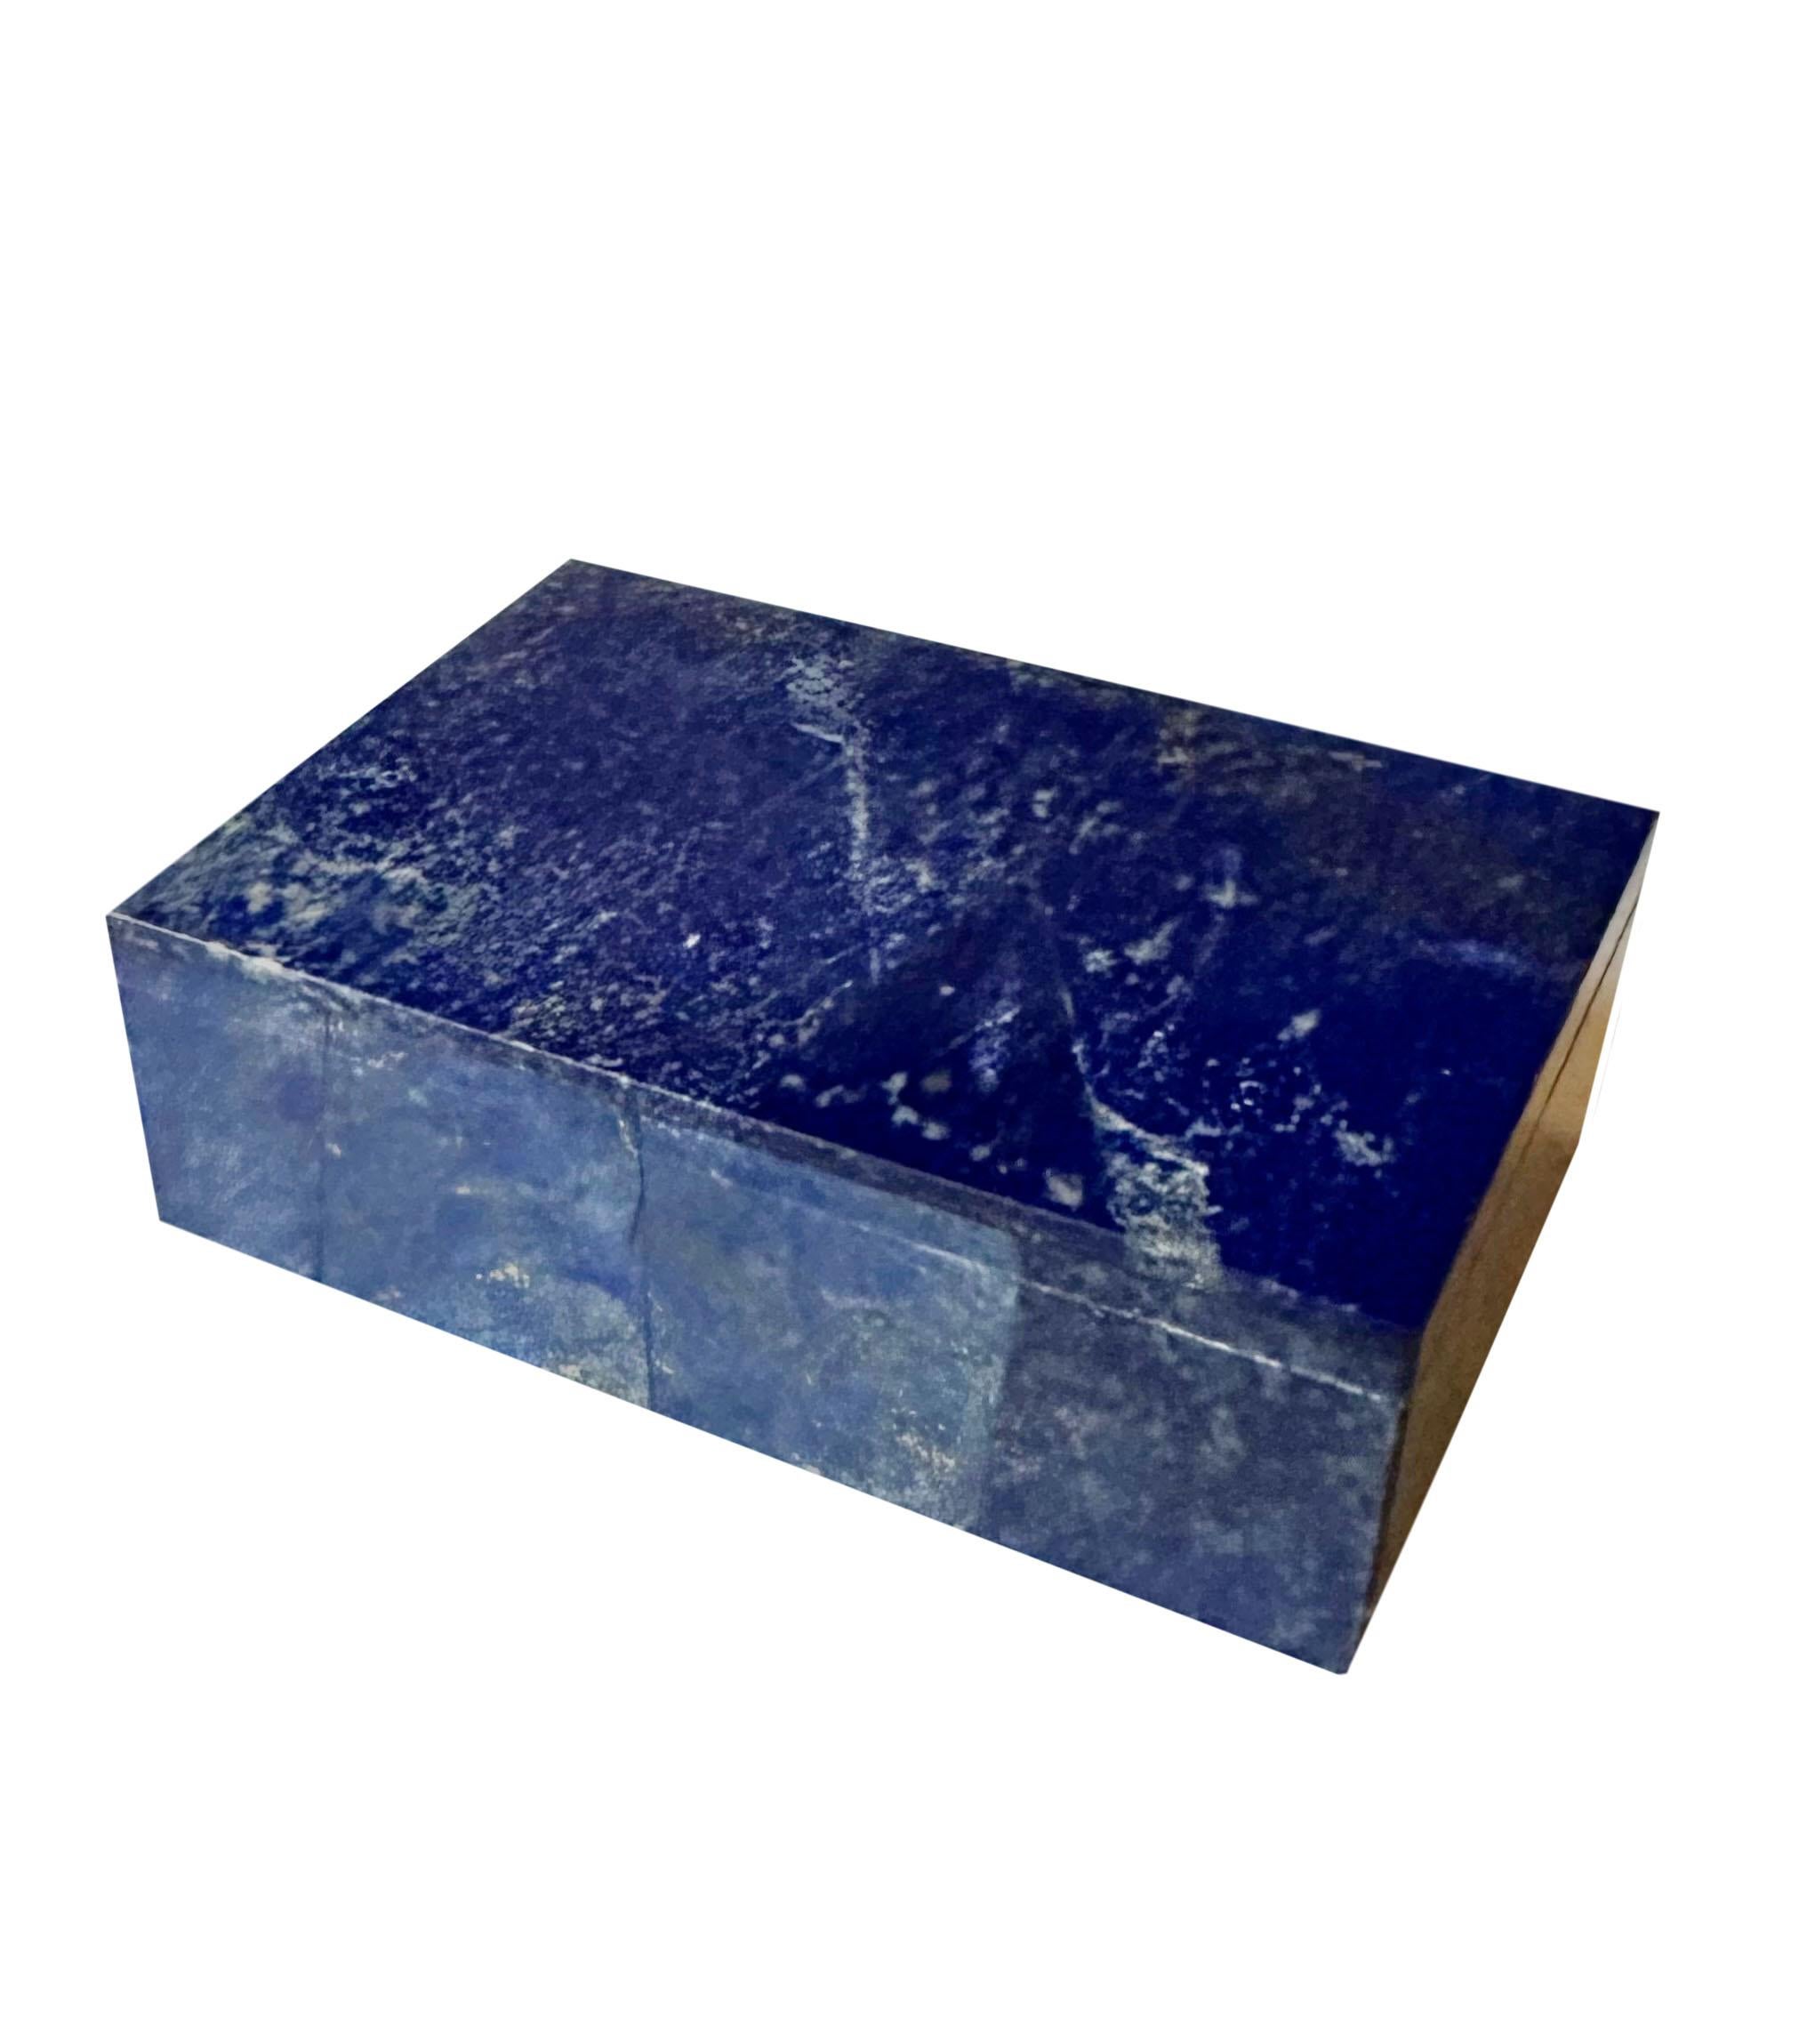 A 1970s or earlier lapis box with a white marble interior. The quality is beautiful.